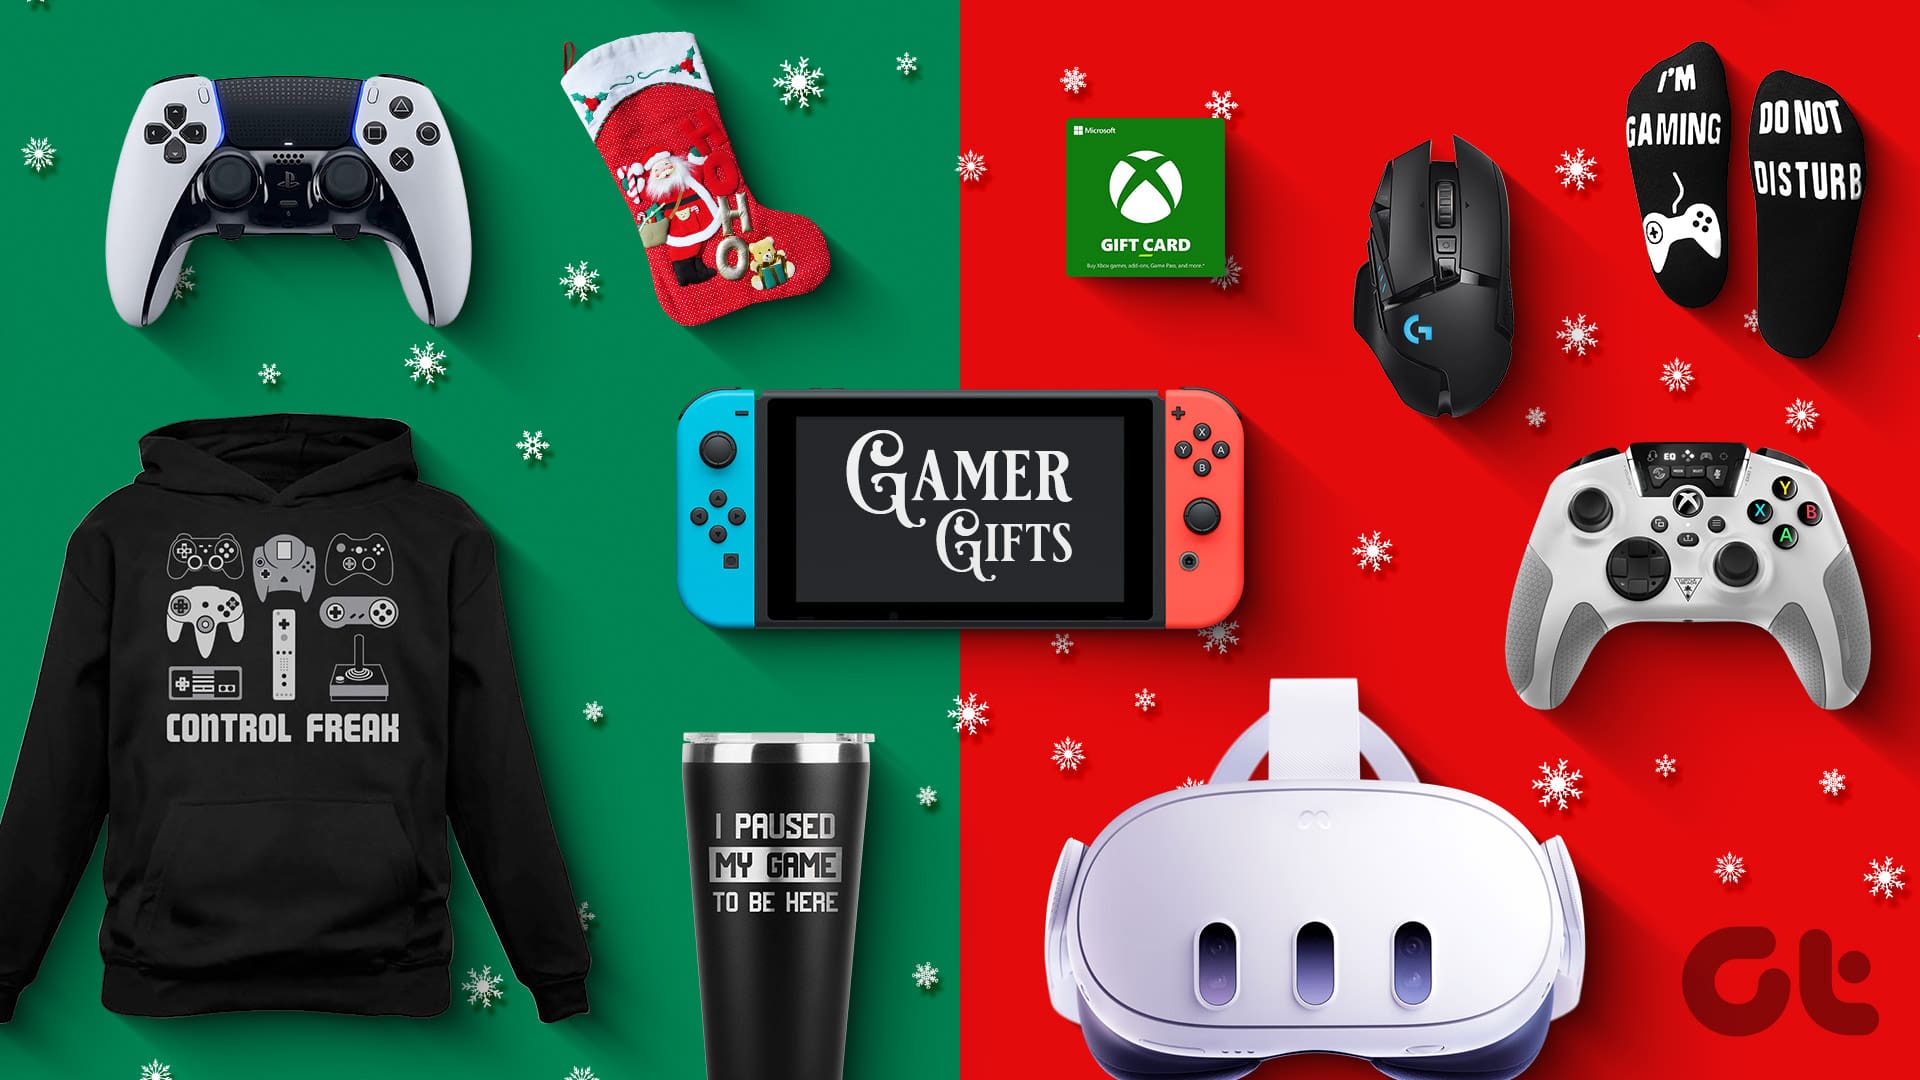 Best gifts for gamers 2020: This is the best gift you can give